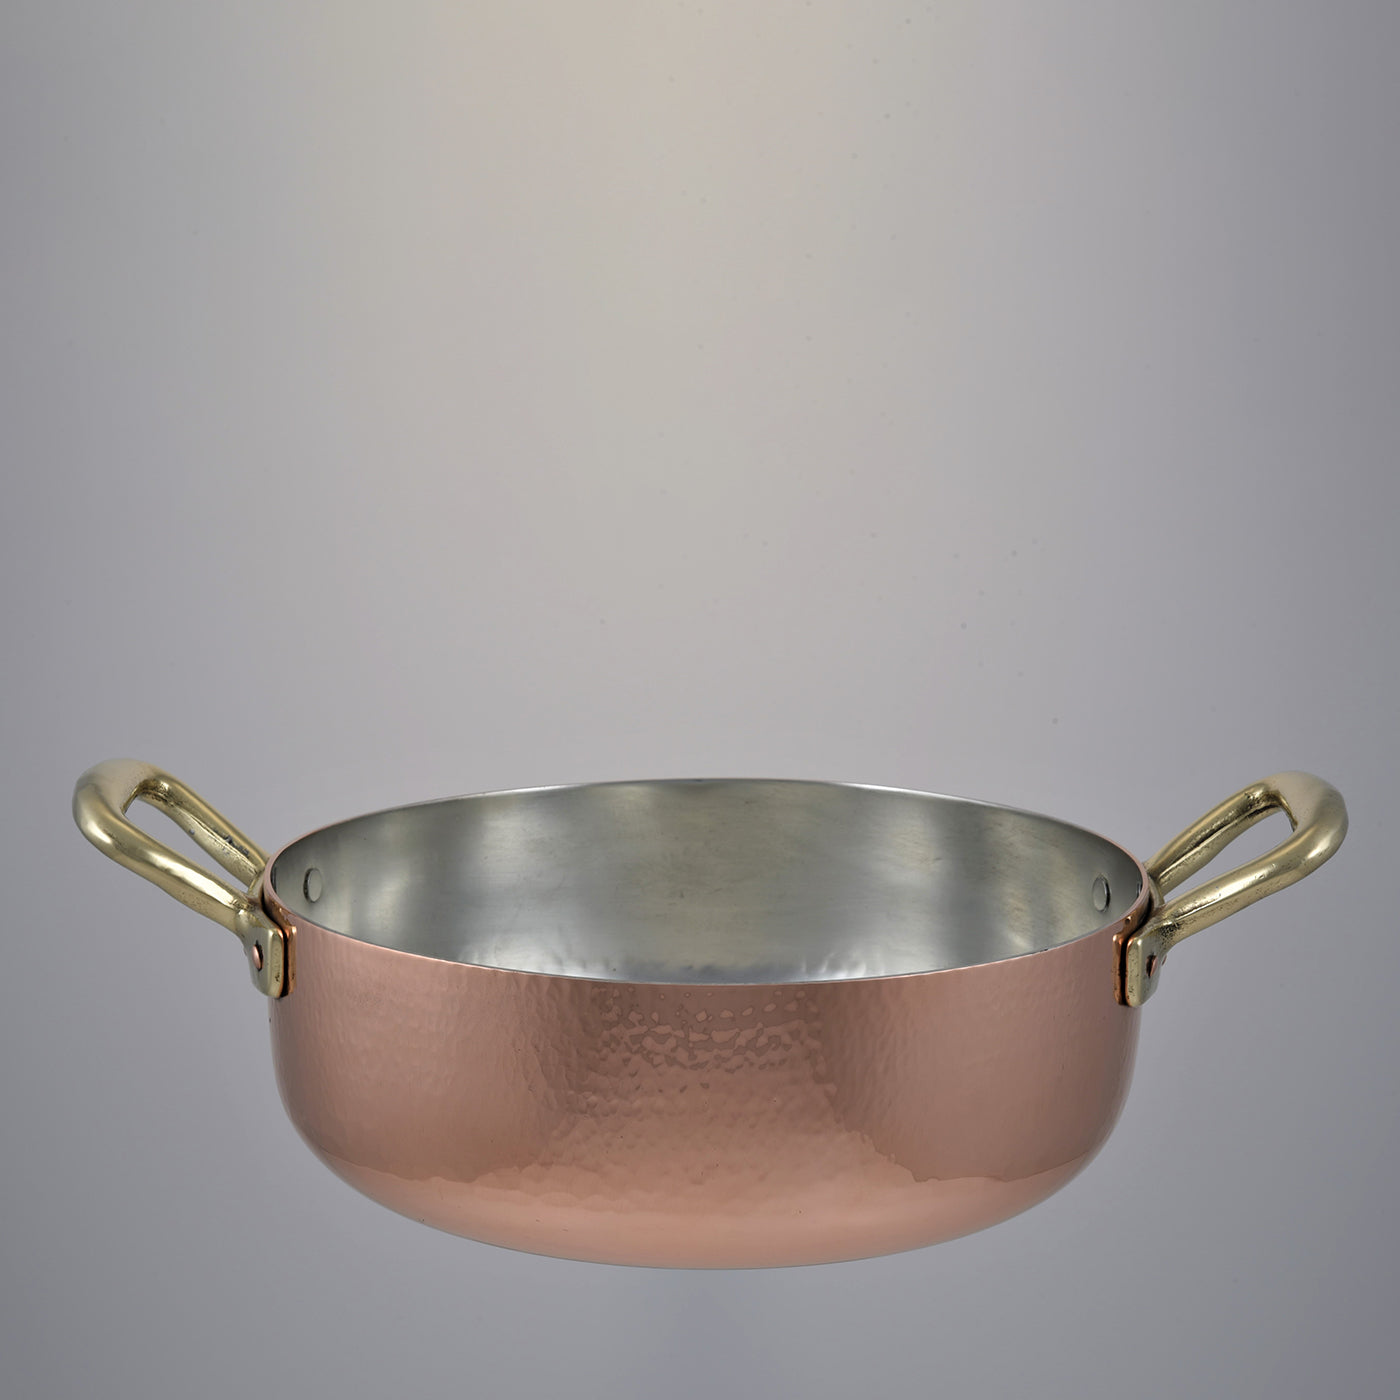 Silver lined 2-Handle Copper Pot with Lid #2 - Alternative view 1